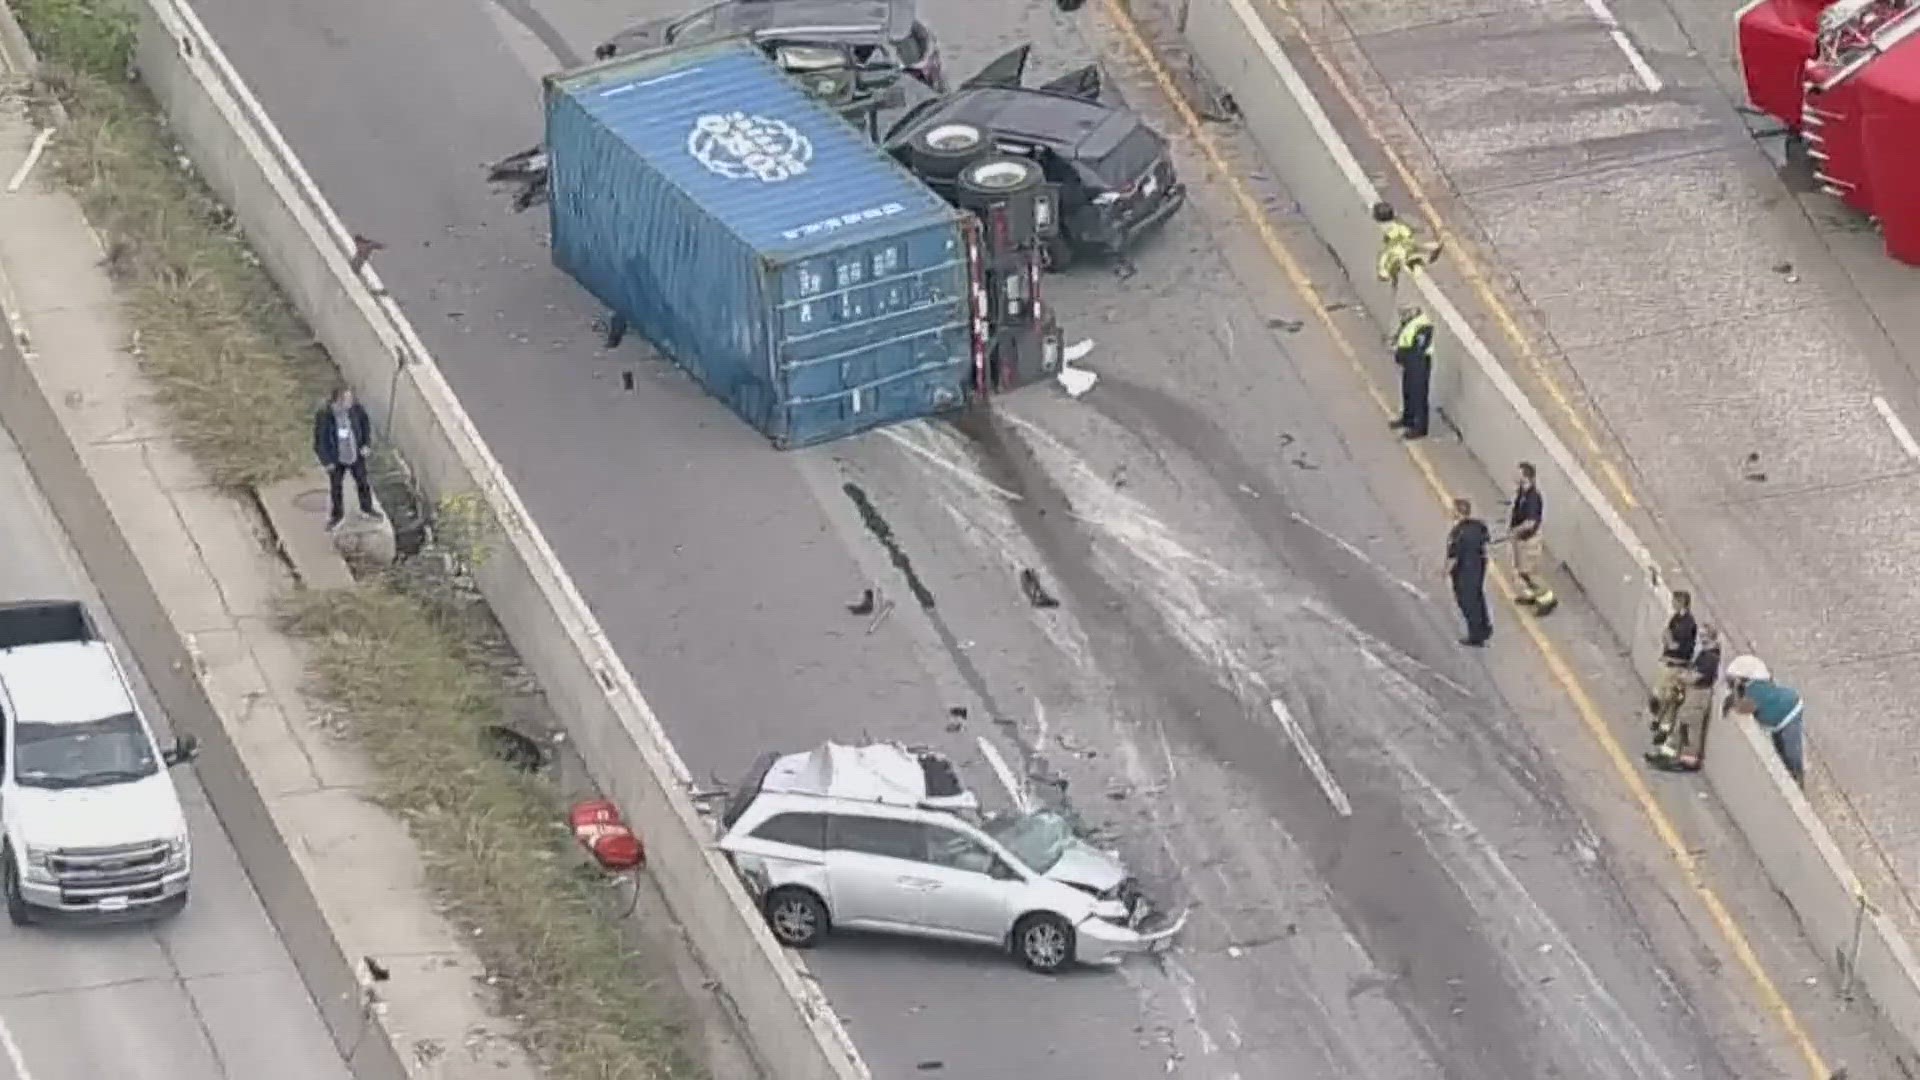 Police said the semi-truck hit a center barrier on the highway and then flipped onto its side.